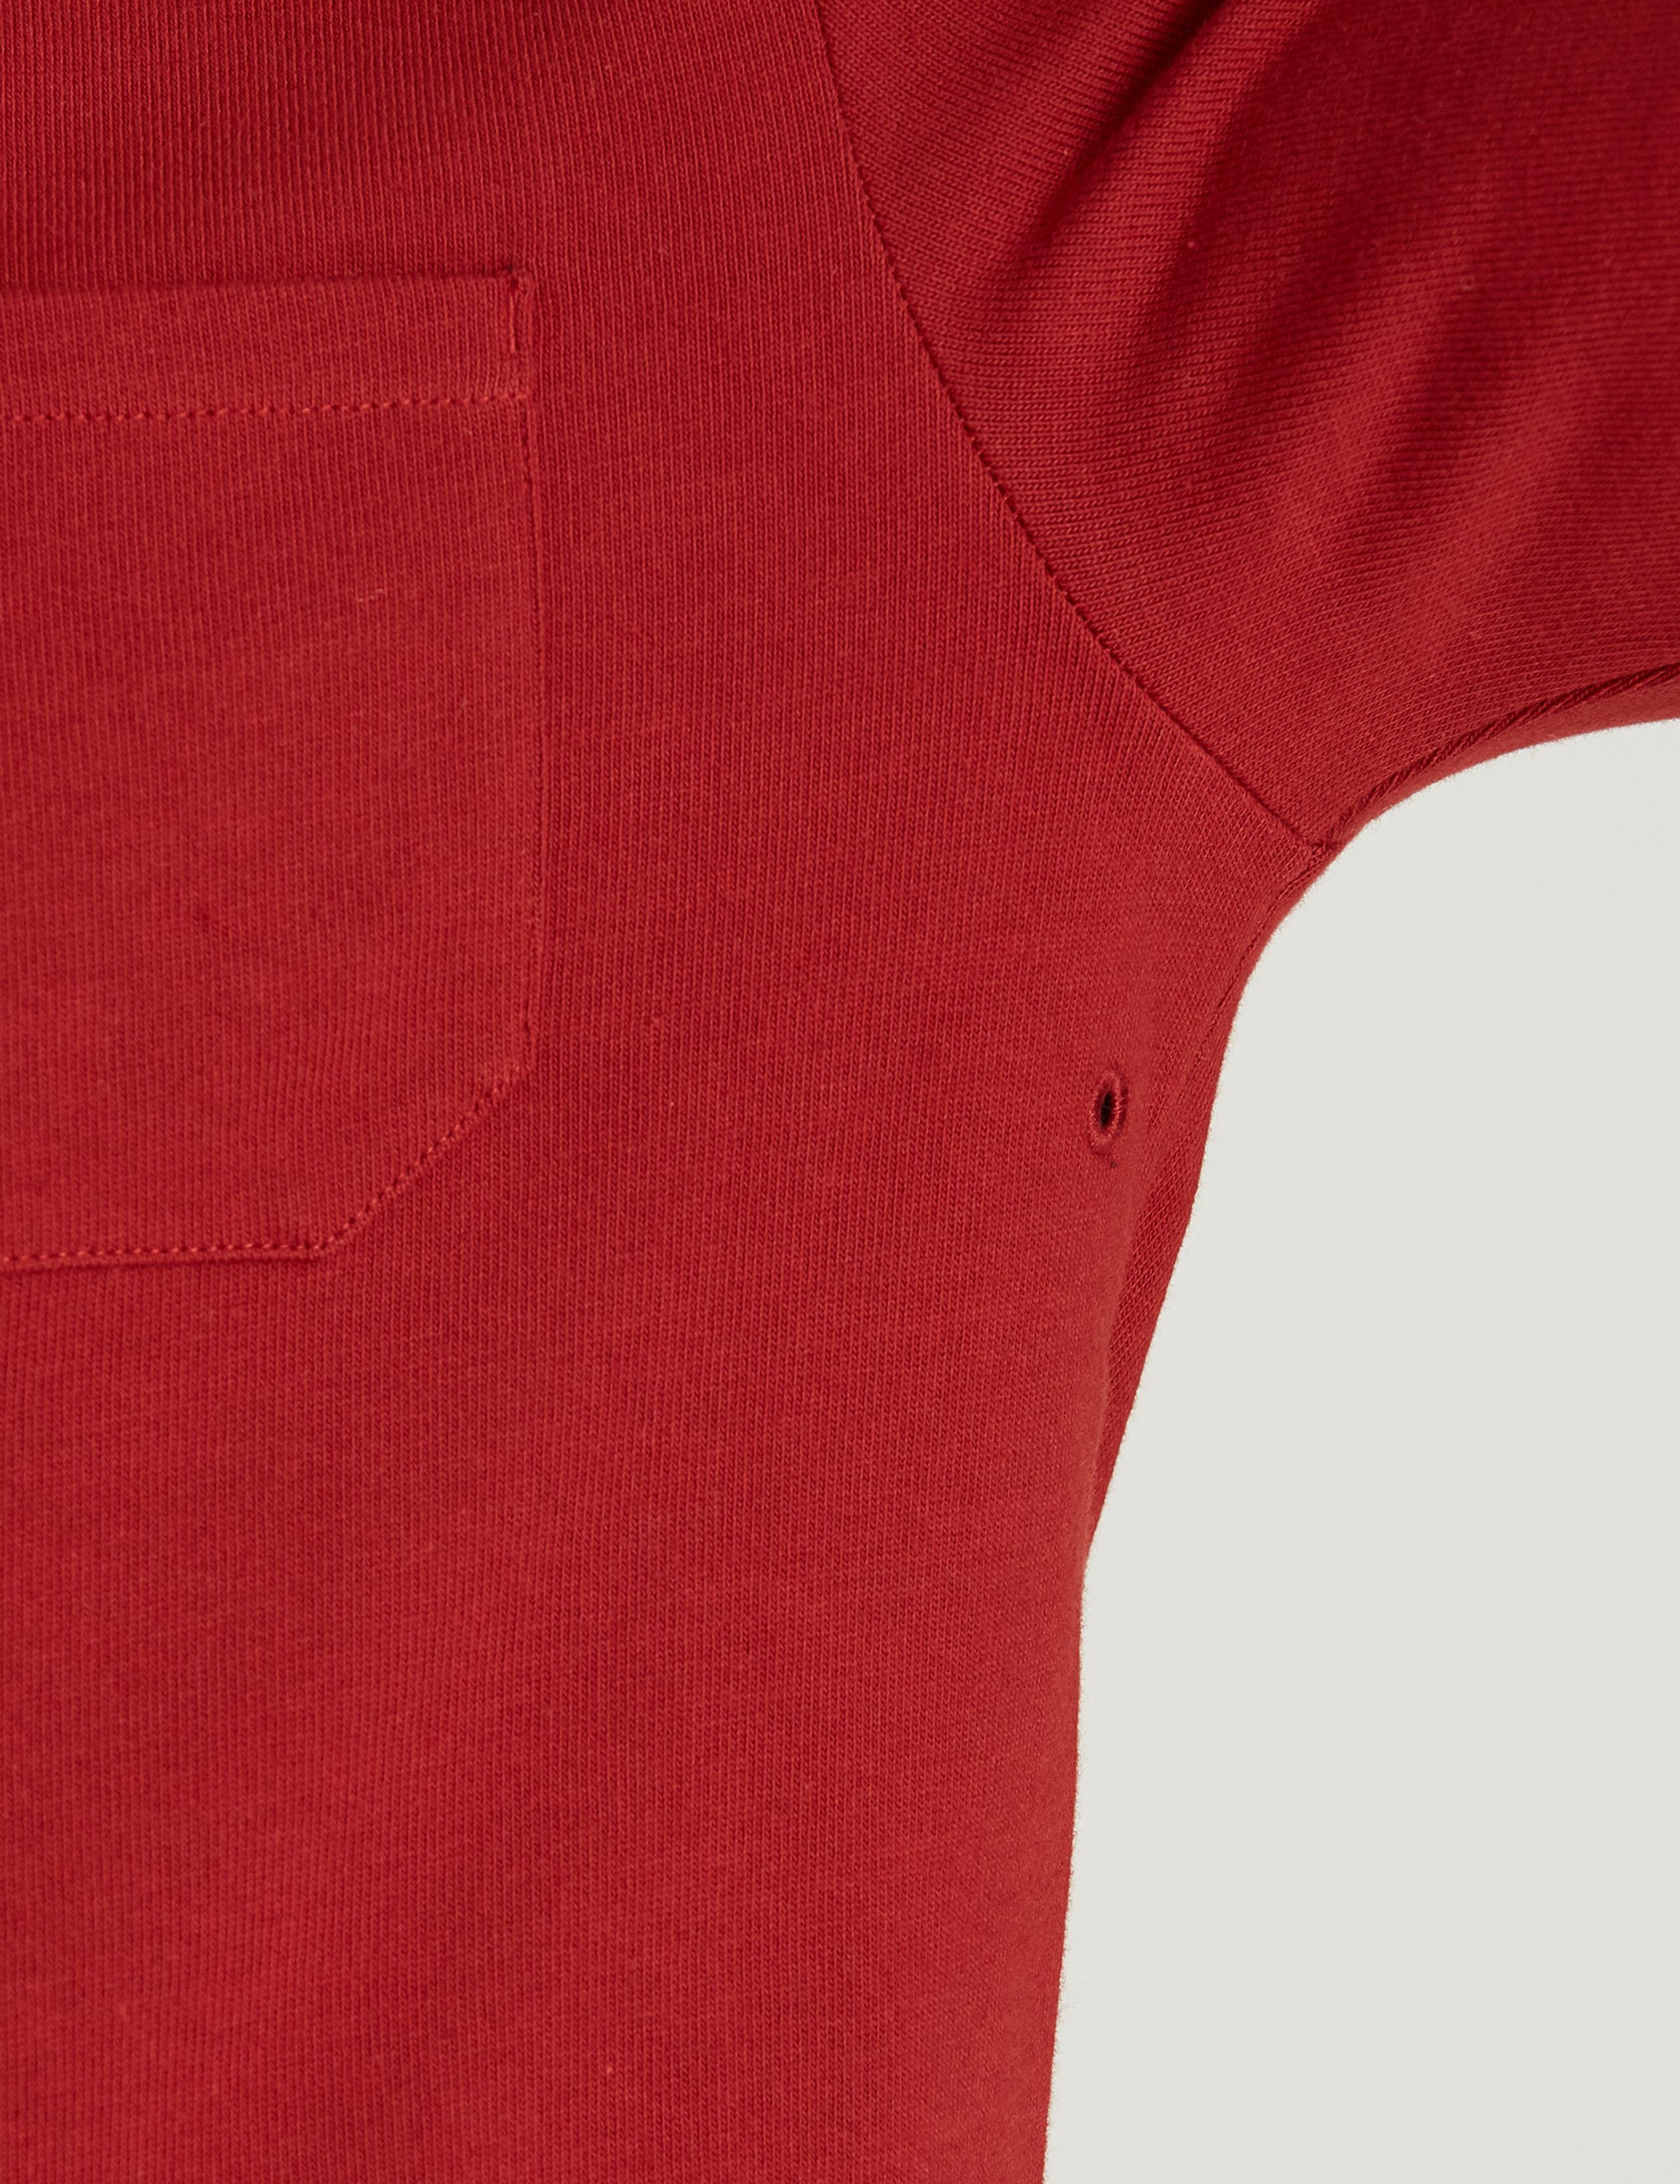 Detail of Jersey Long-Sleeve Crew